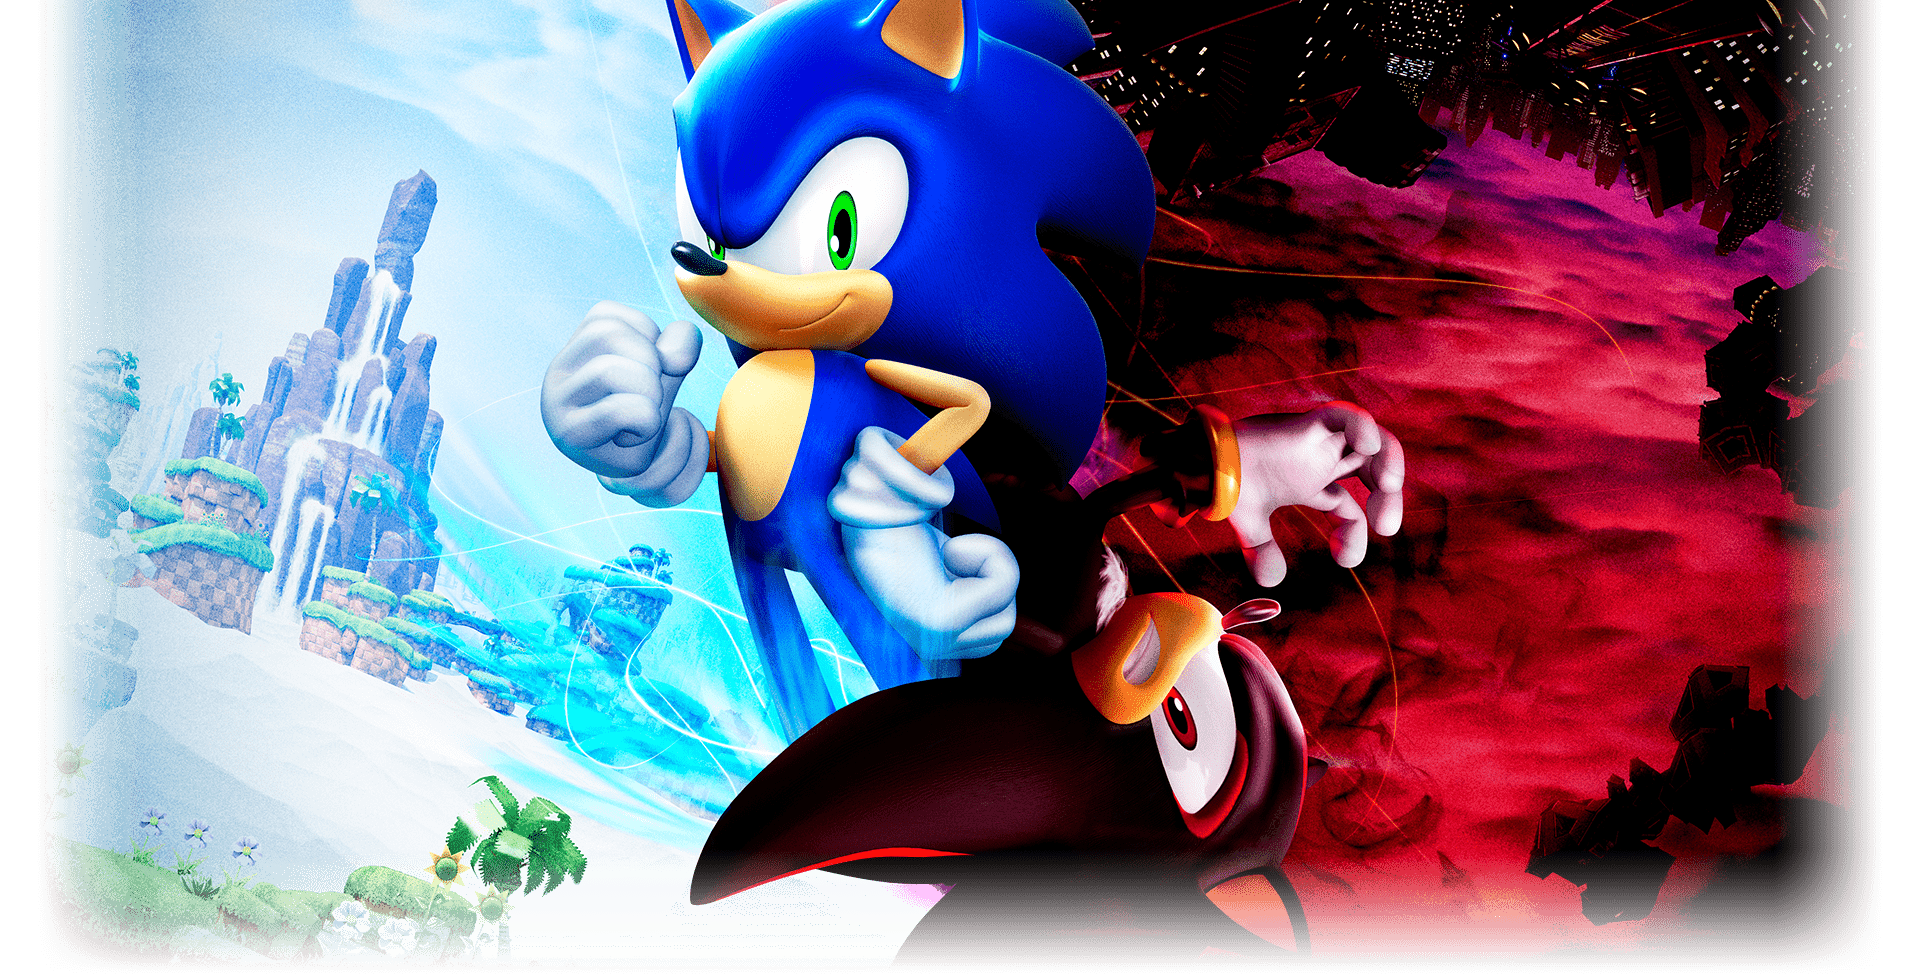 Sonic x Shadow Sonic Legacy Skin is based on Dreamcast Sonic